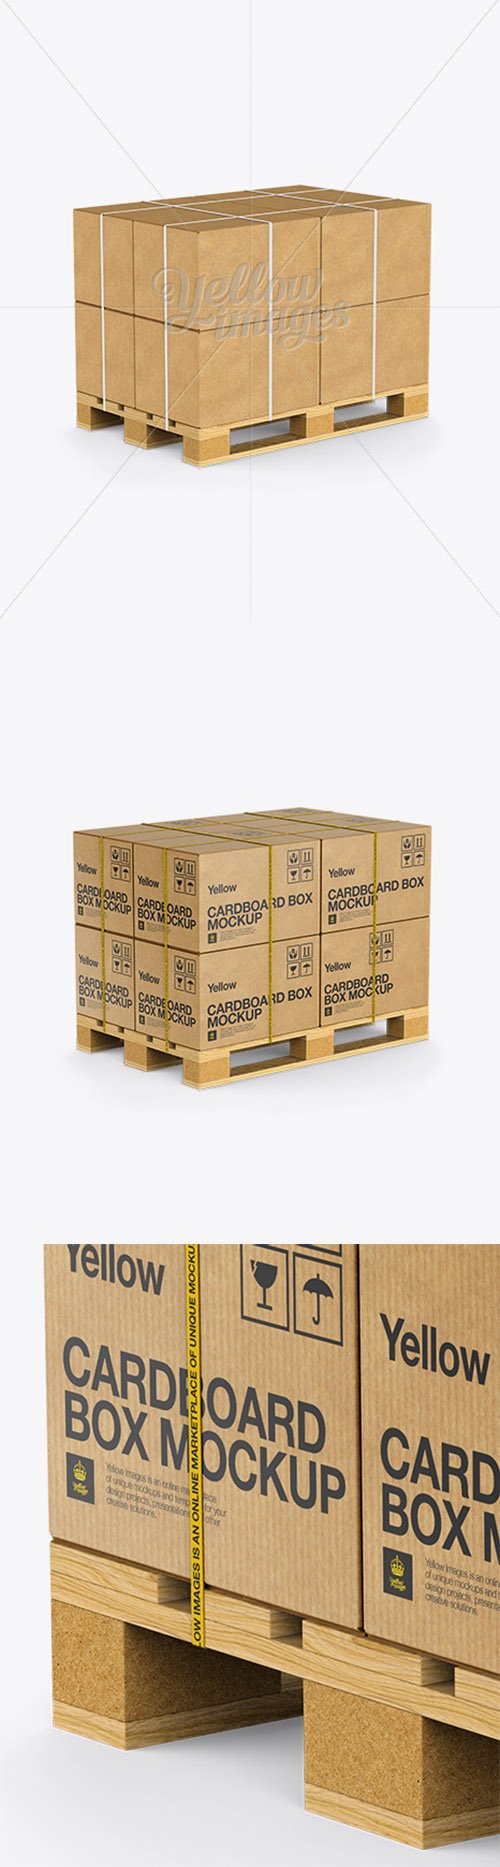 Wooden Pallet With 8 Cardboard Boxes Mockup - Halfside View 15734 TIF